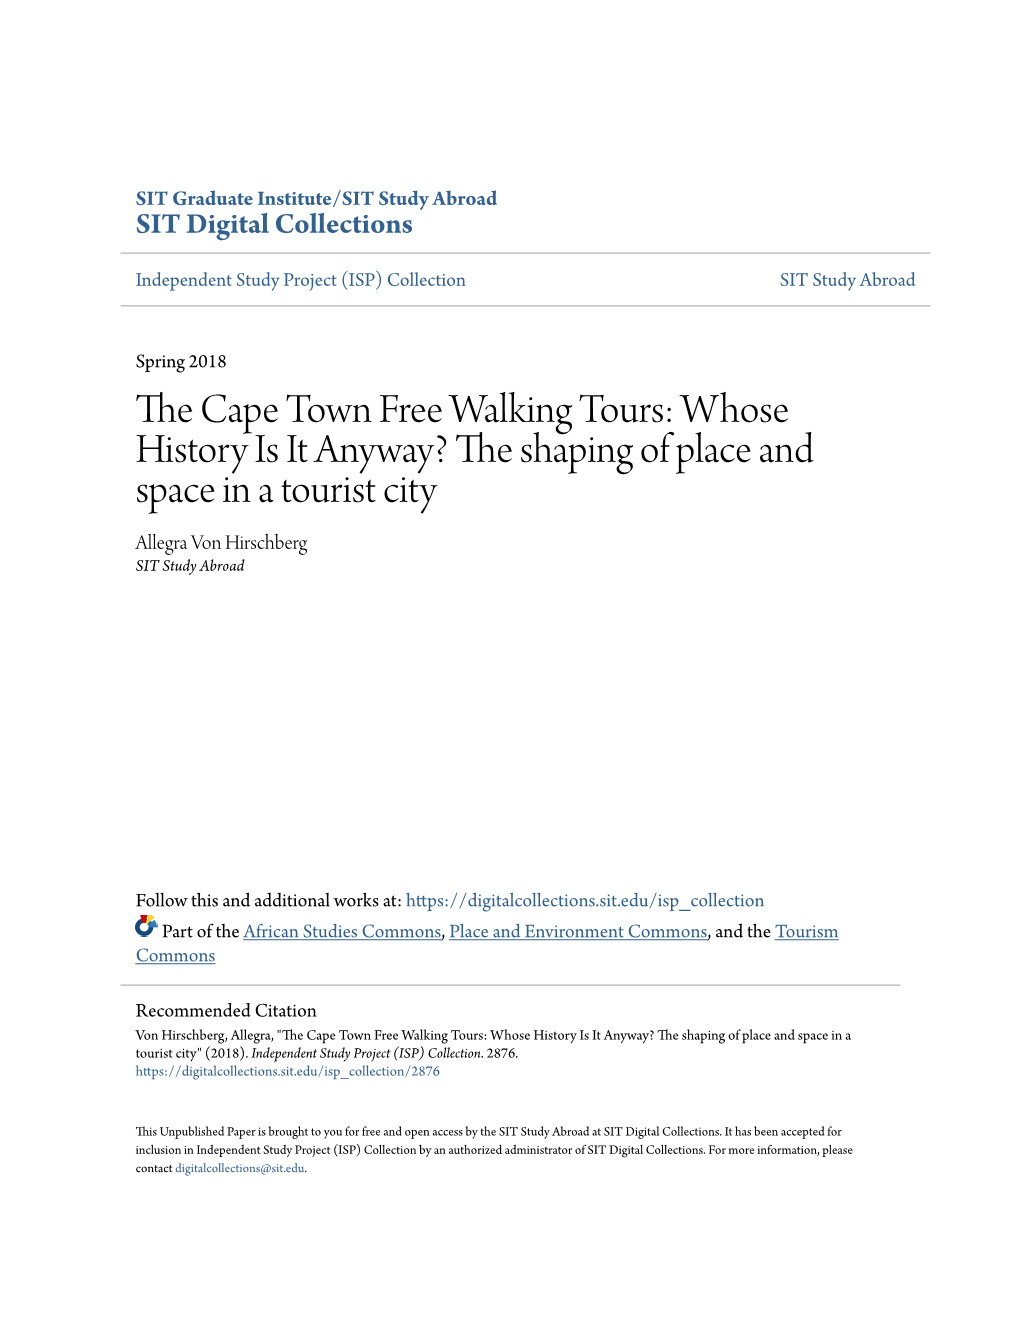 The Cape Town Free Walking Tours: Whose History Is It Anyway? the Shaping of Place and Space in a Tourist City